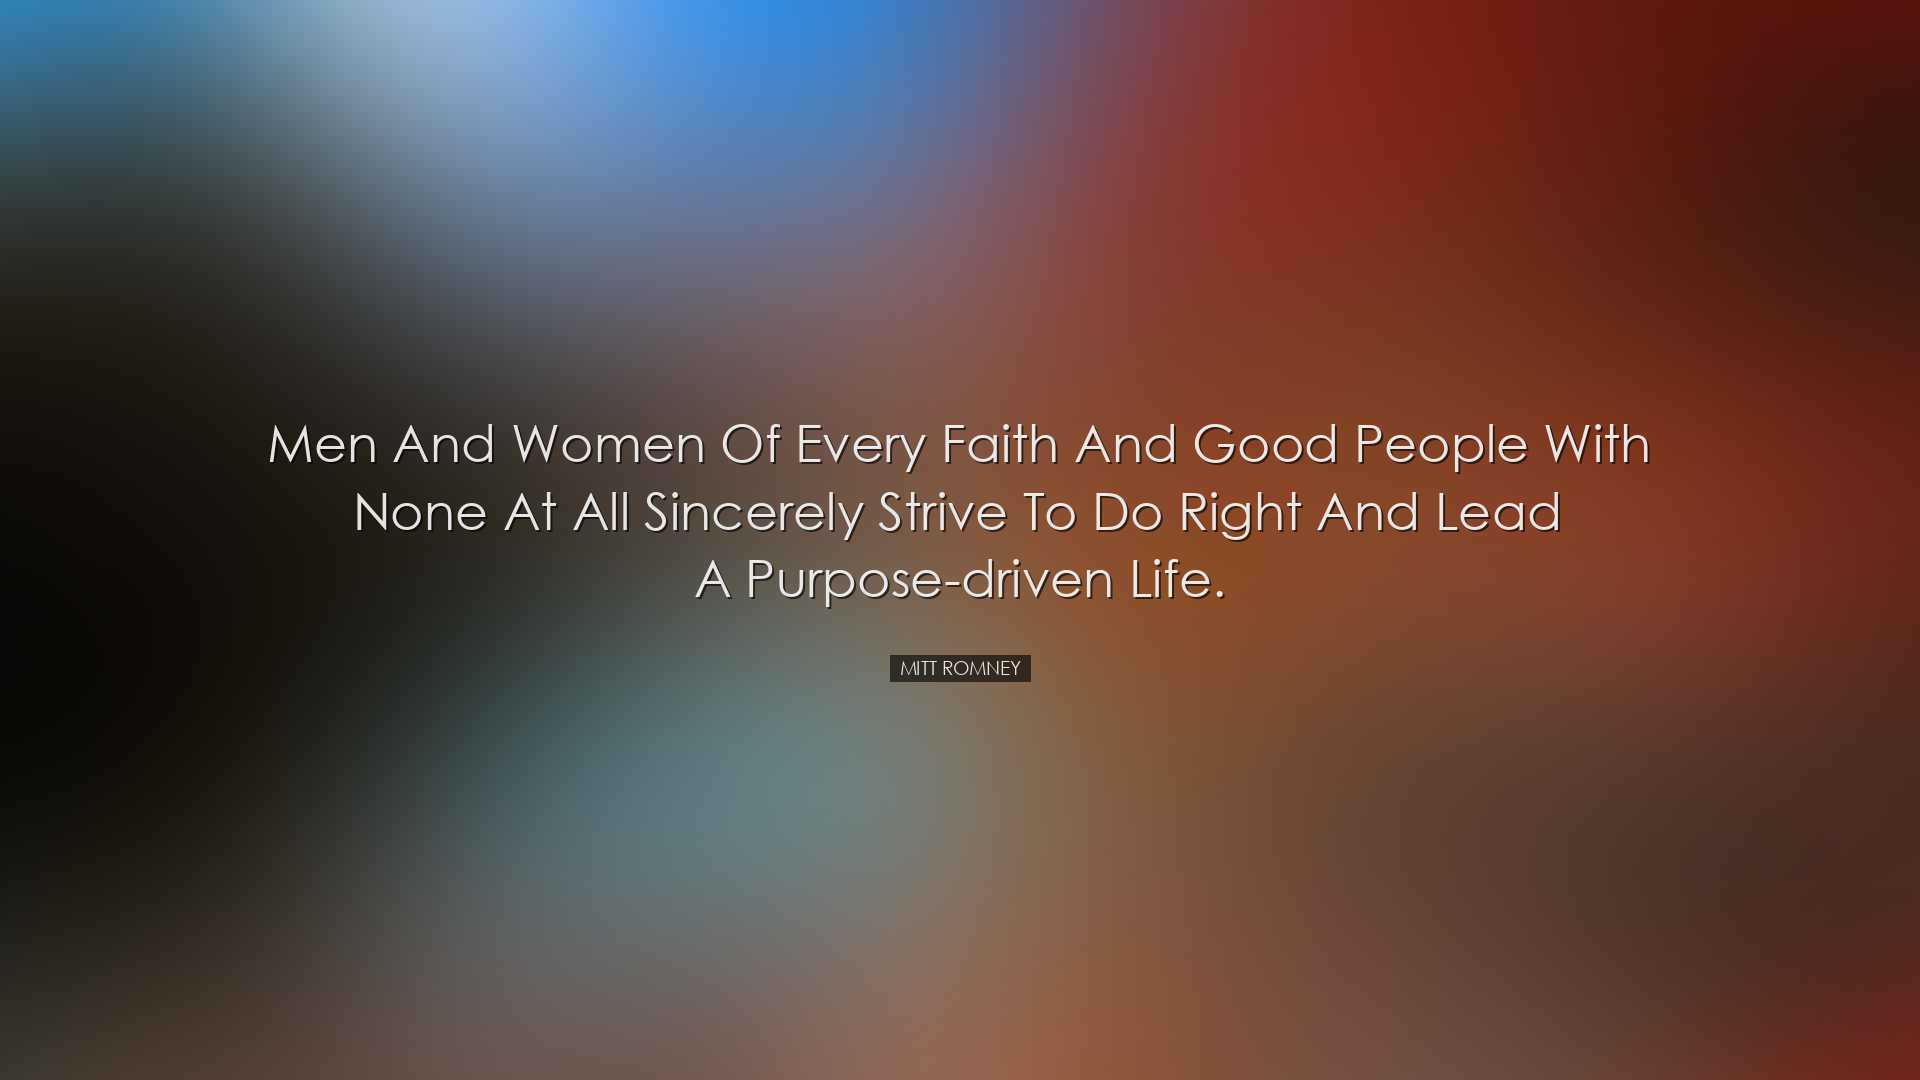 Men and women of every faith and good people with none at all sinc